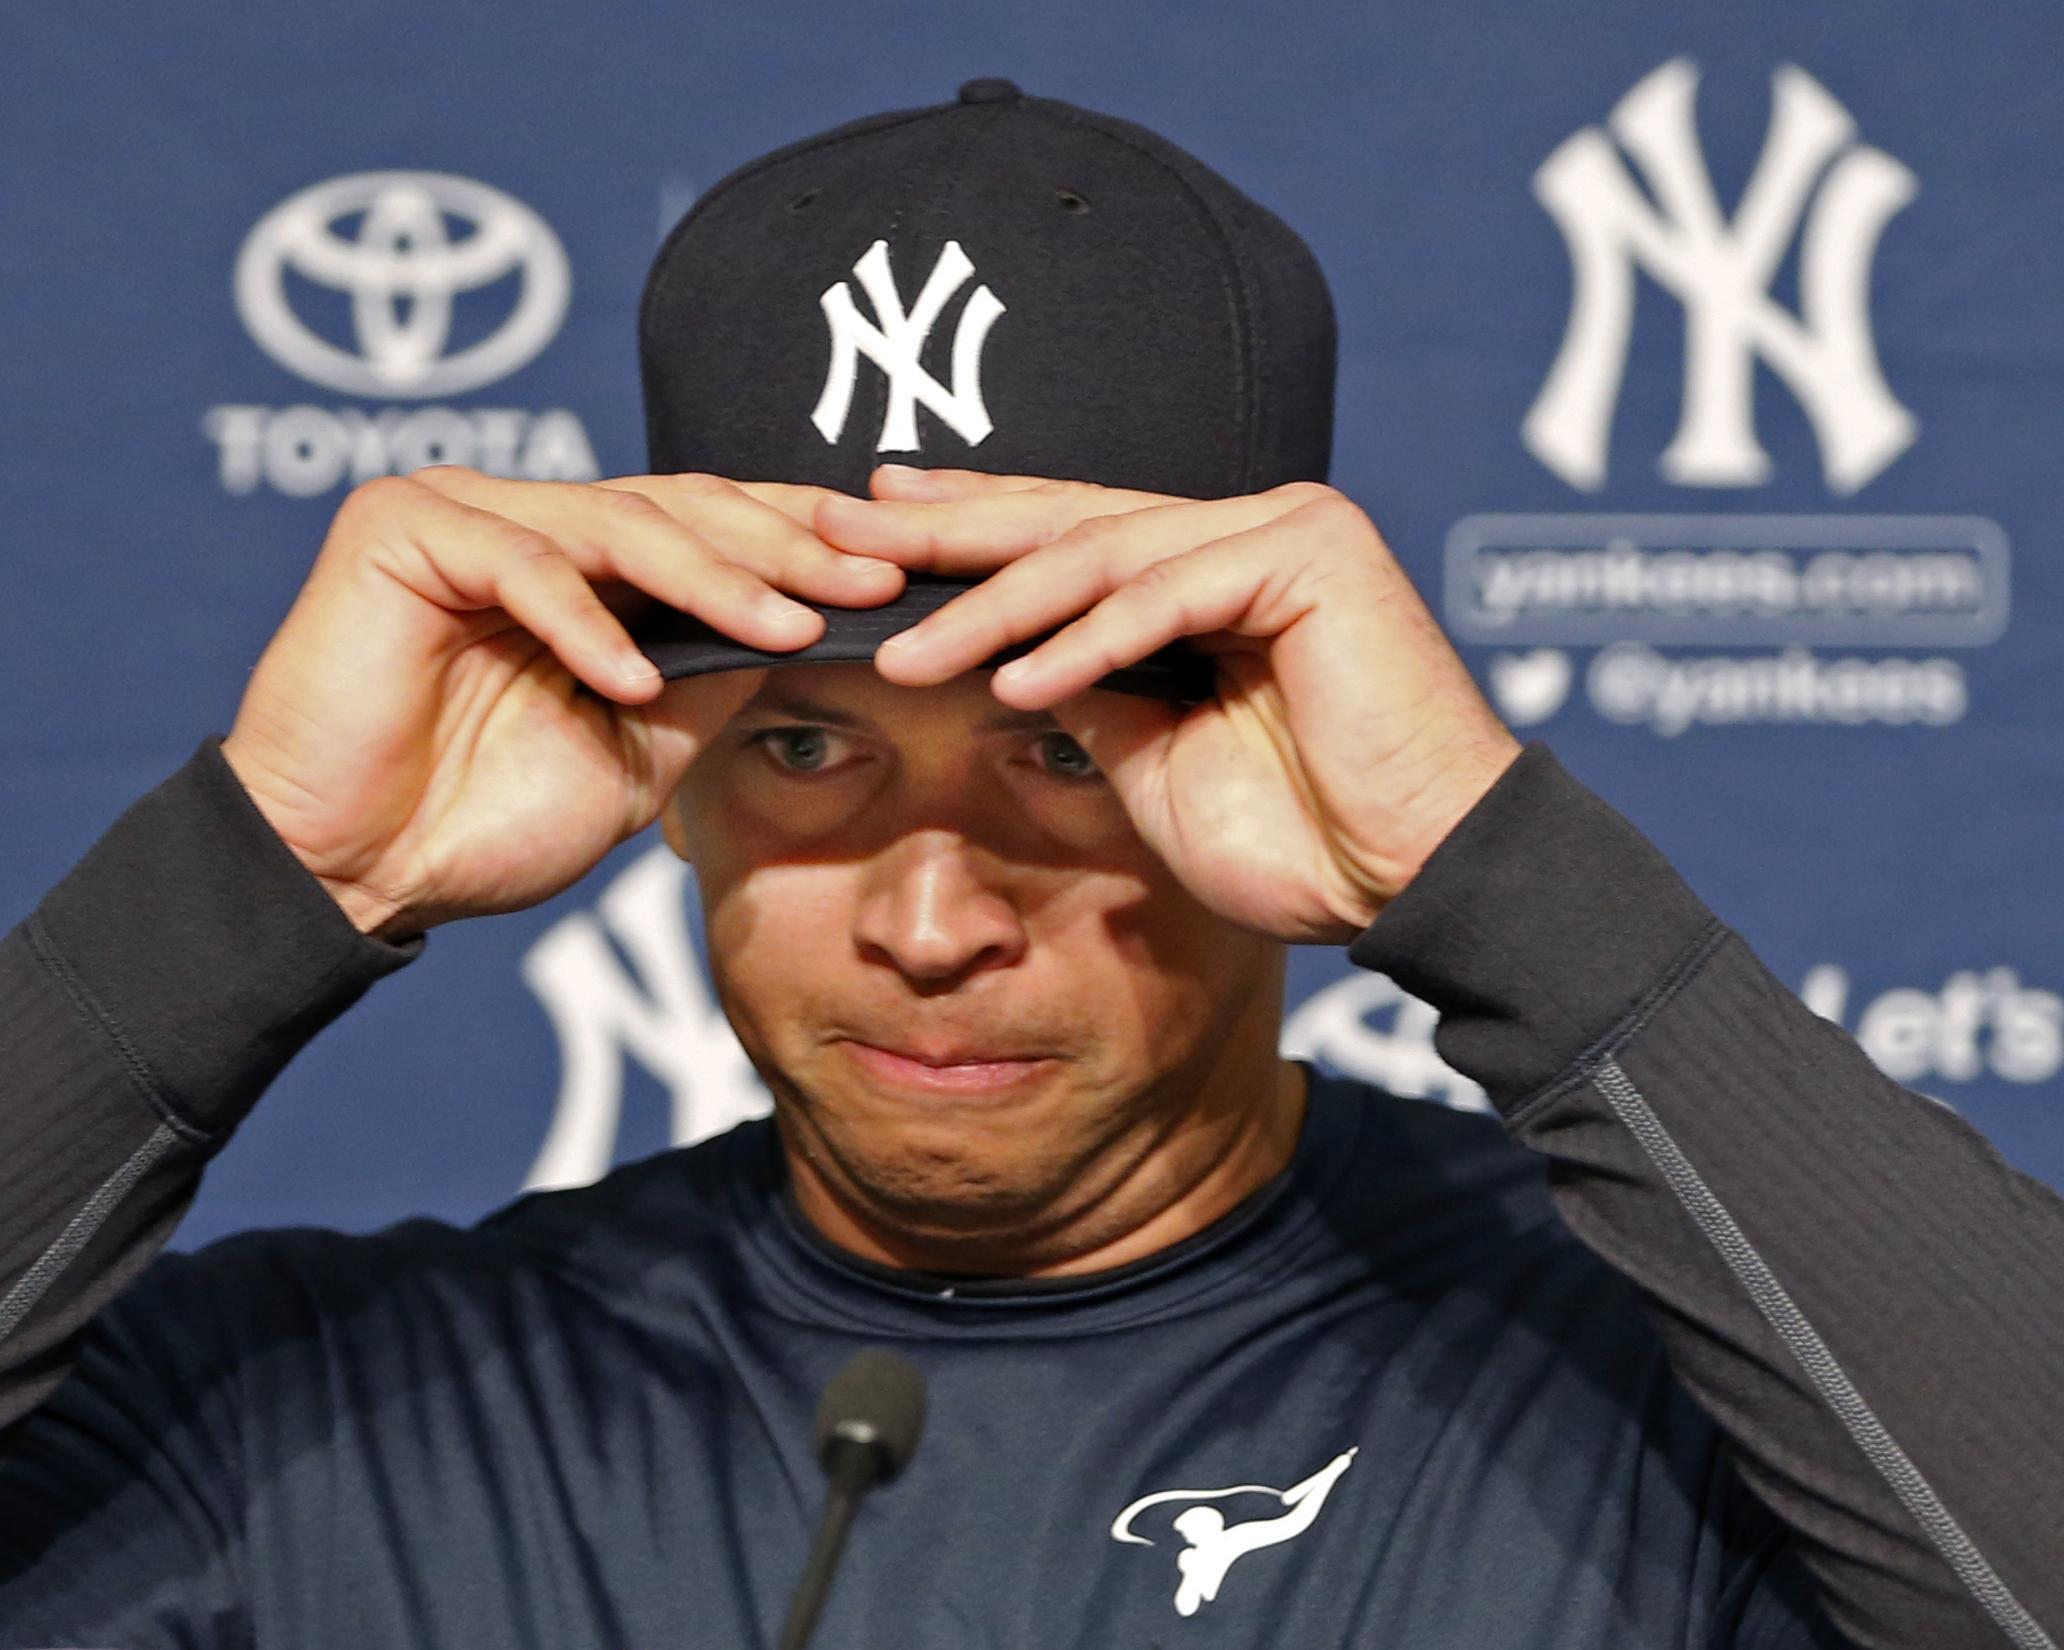 Rodriguez struggled to put his Yankees cap on at a press conference to announce his final game